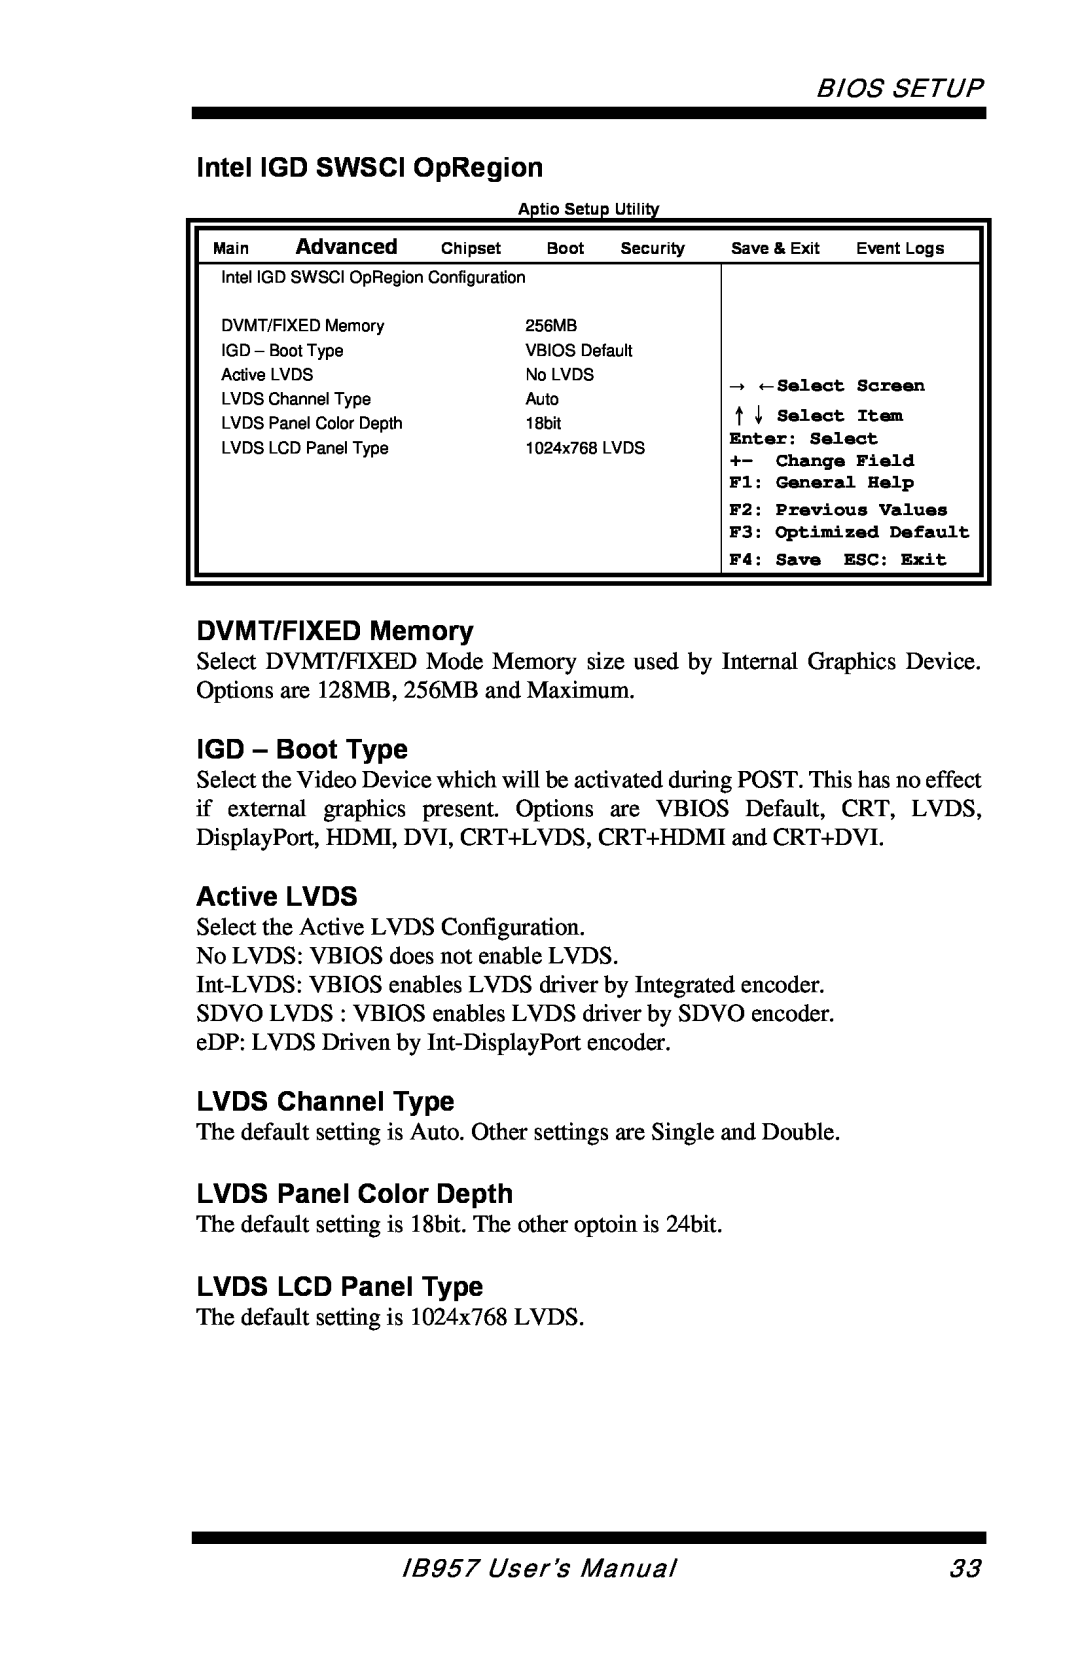 Intel IB957 Intel IGD SWSCI OpRegion, DVMT/FIXED Memory, IGD - Boot Type, Active LVDS, LVDS Channel Type, Bios Setup 